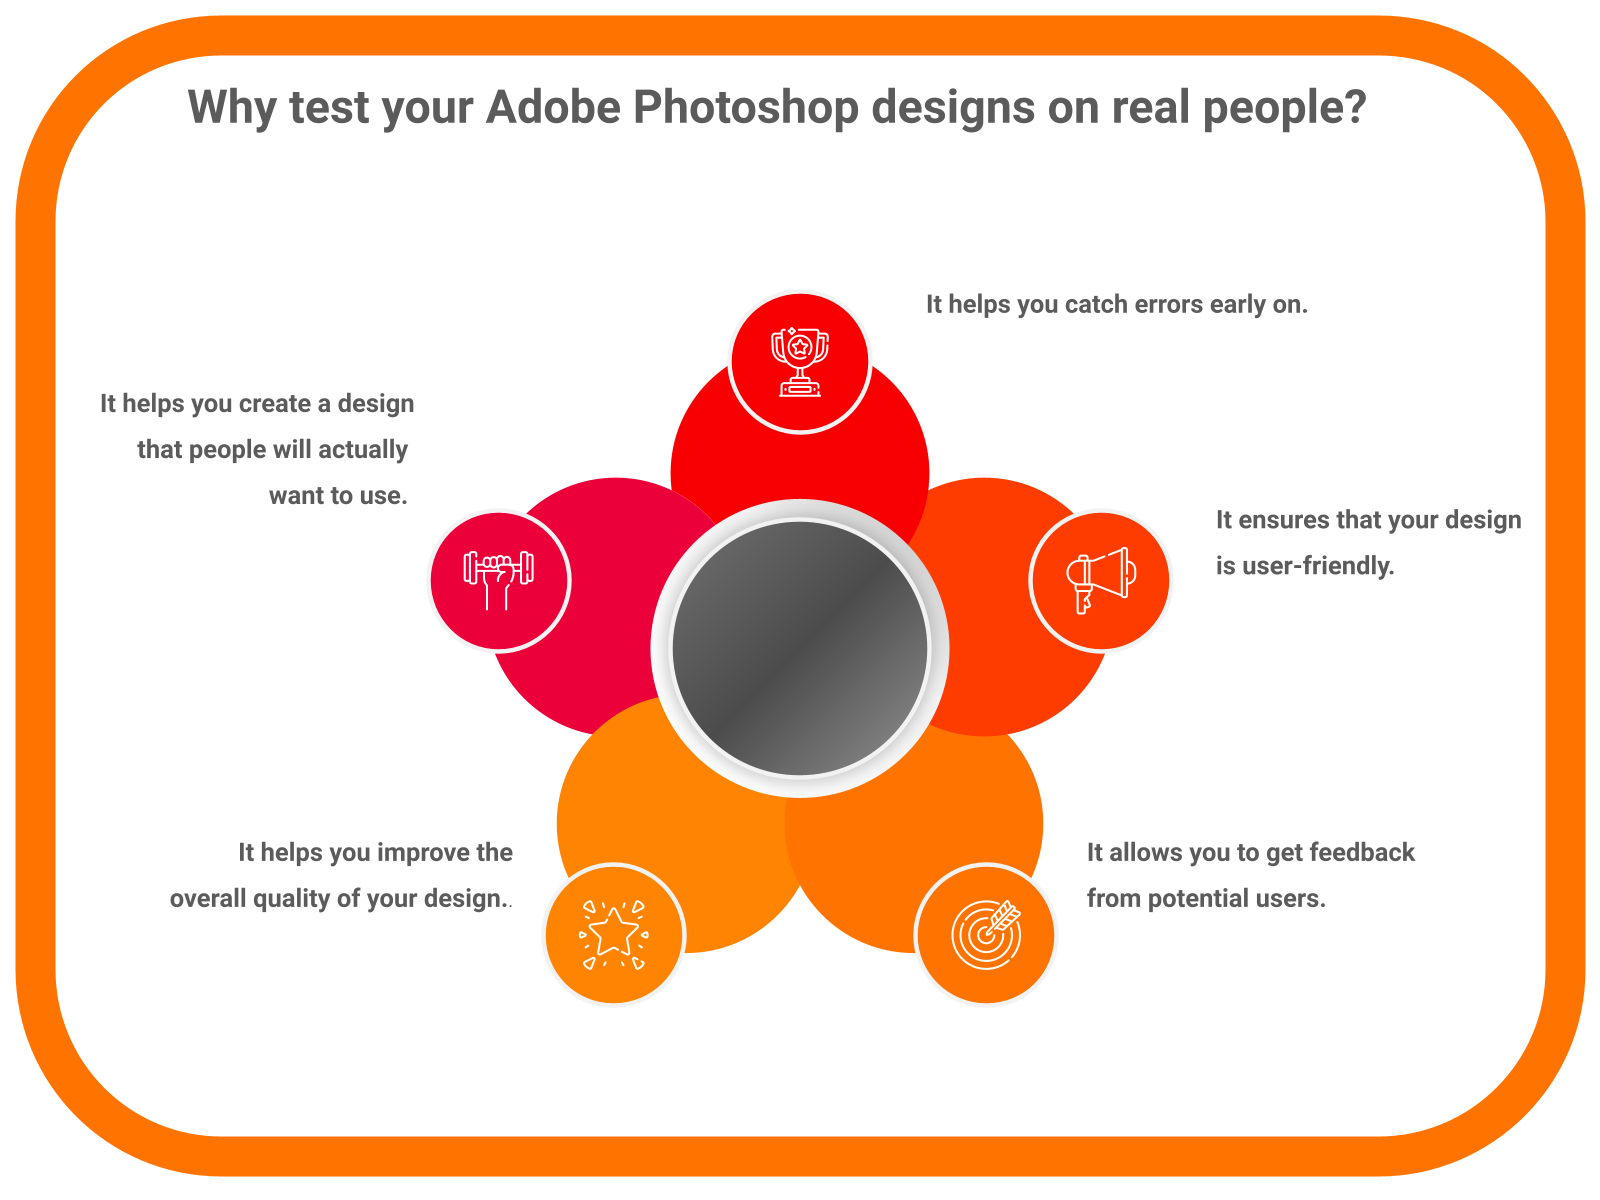 Why test your Adobe Photoshop designs on real people?